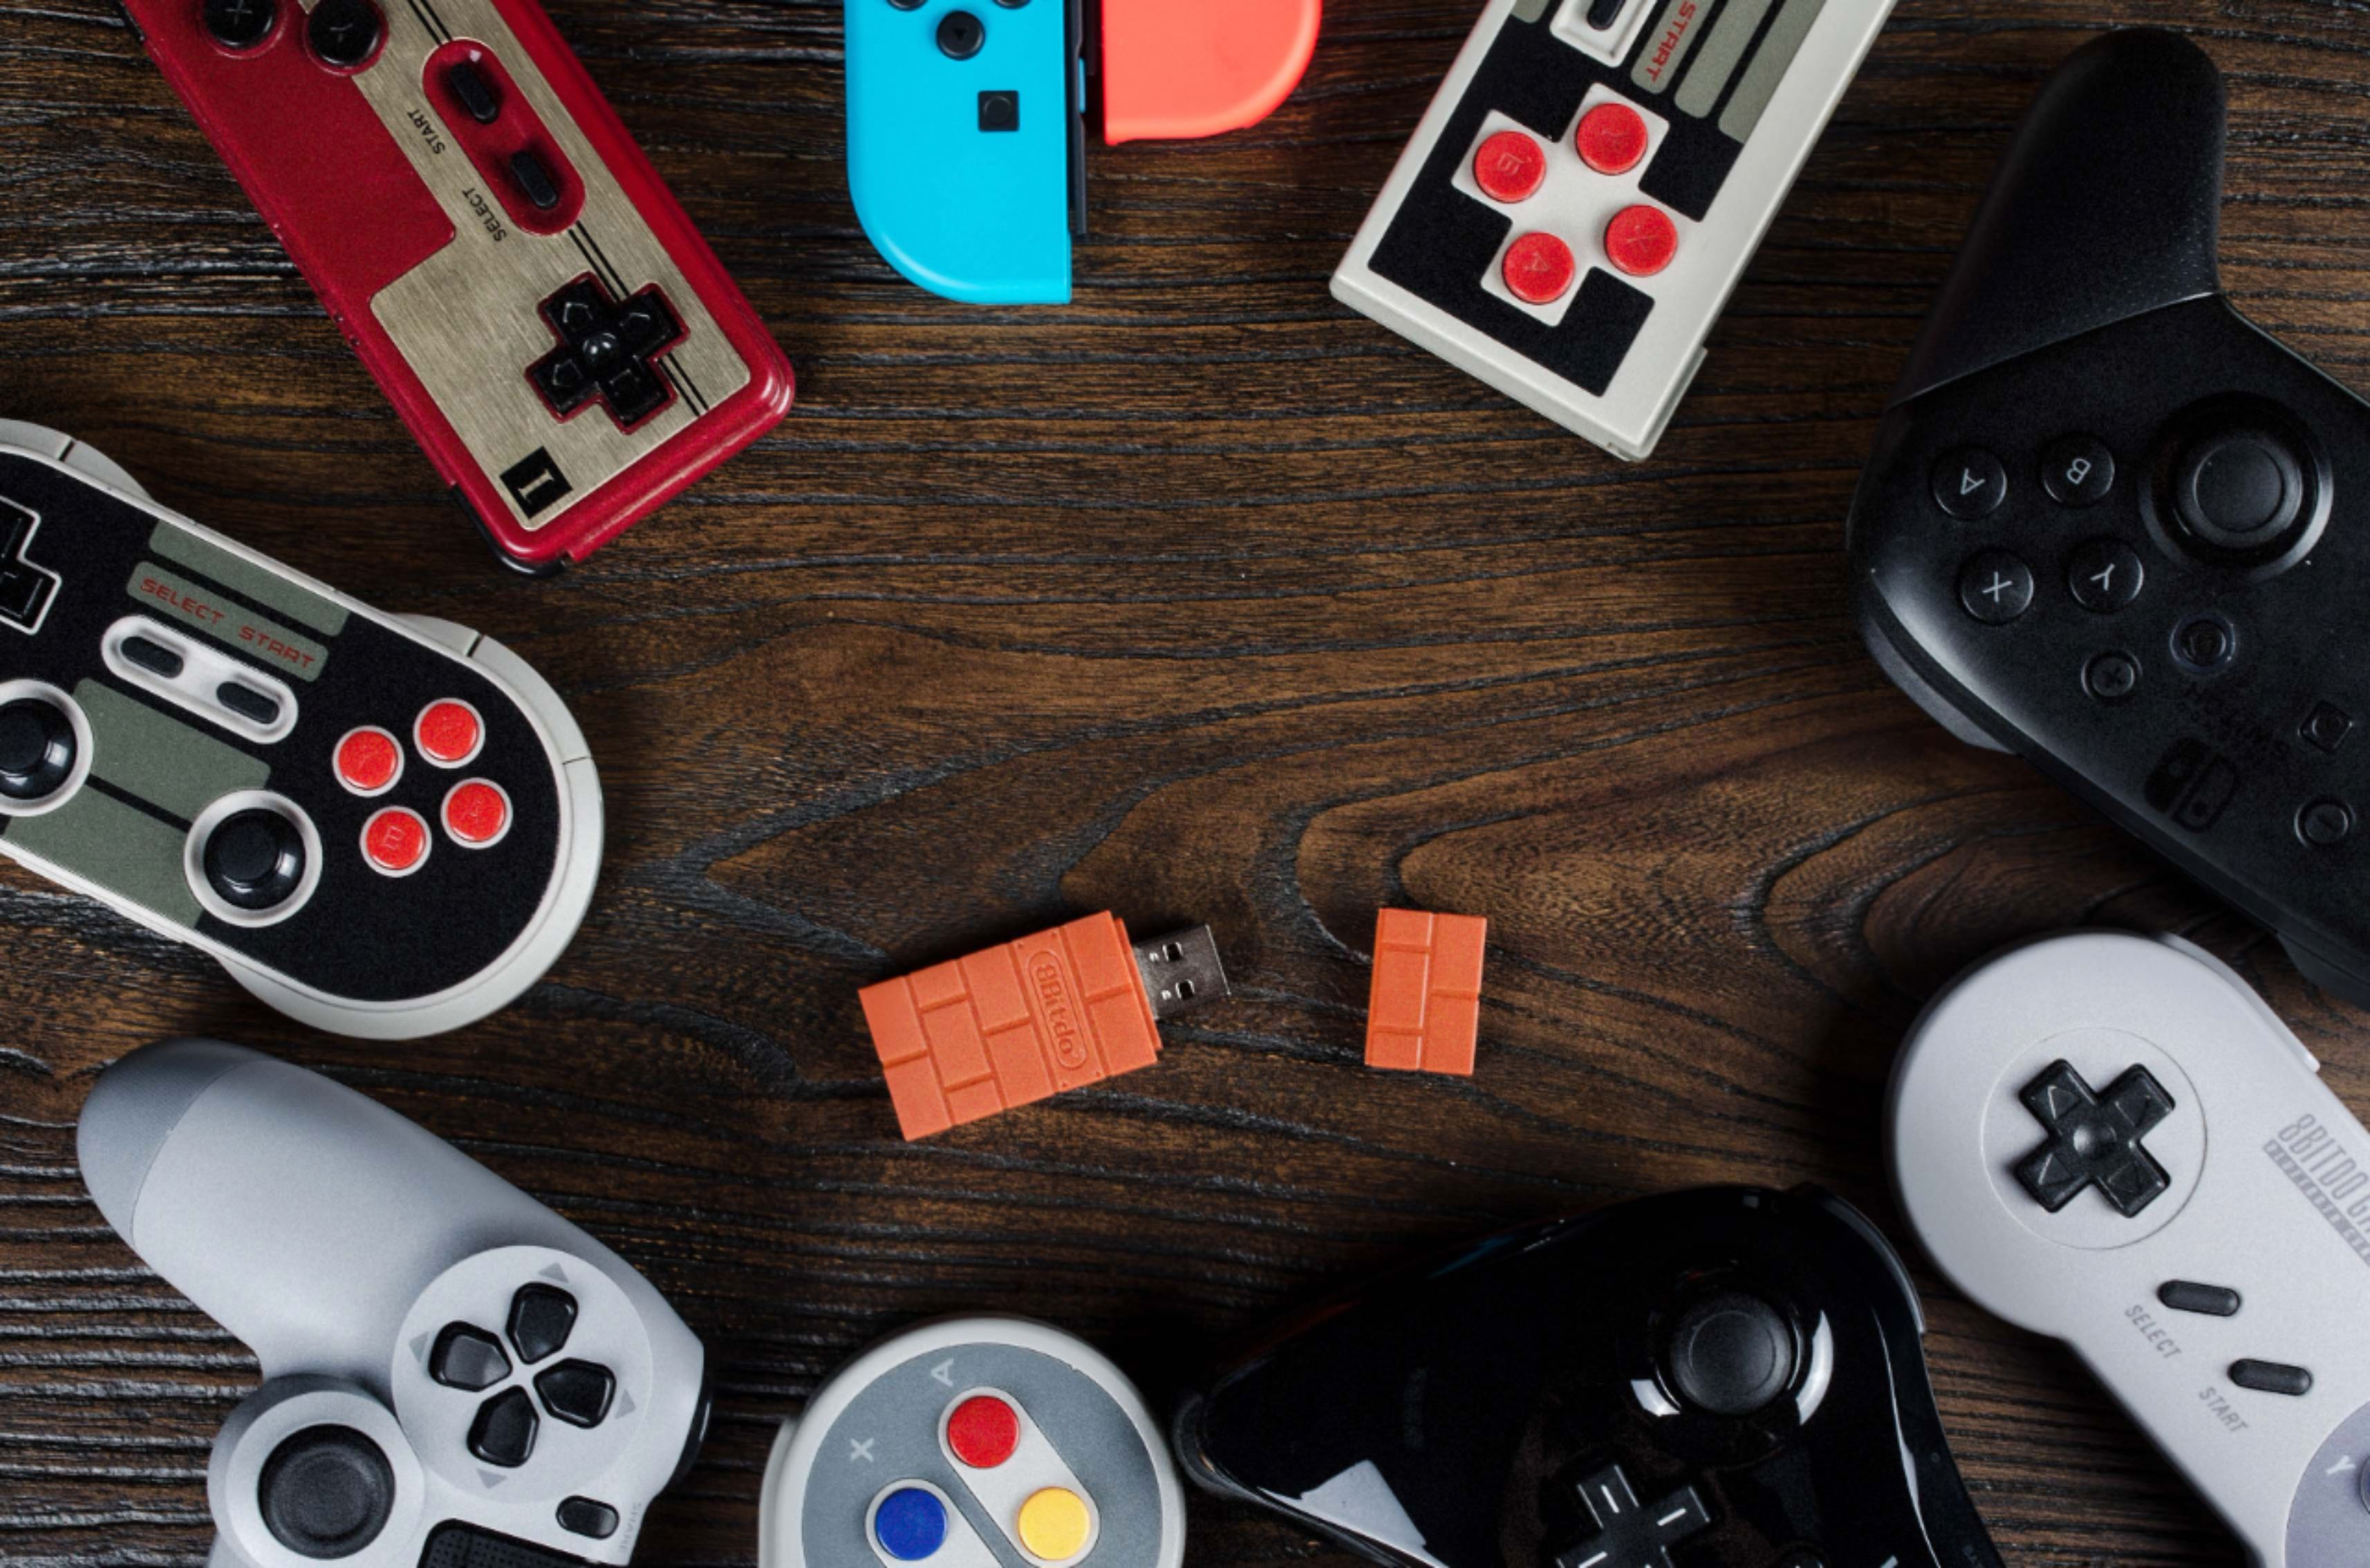 8bitdo Wireless Usb Adapter For Most Gaming Controllers Brick Red 83da Best Buy